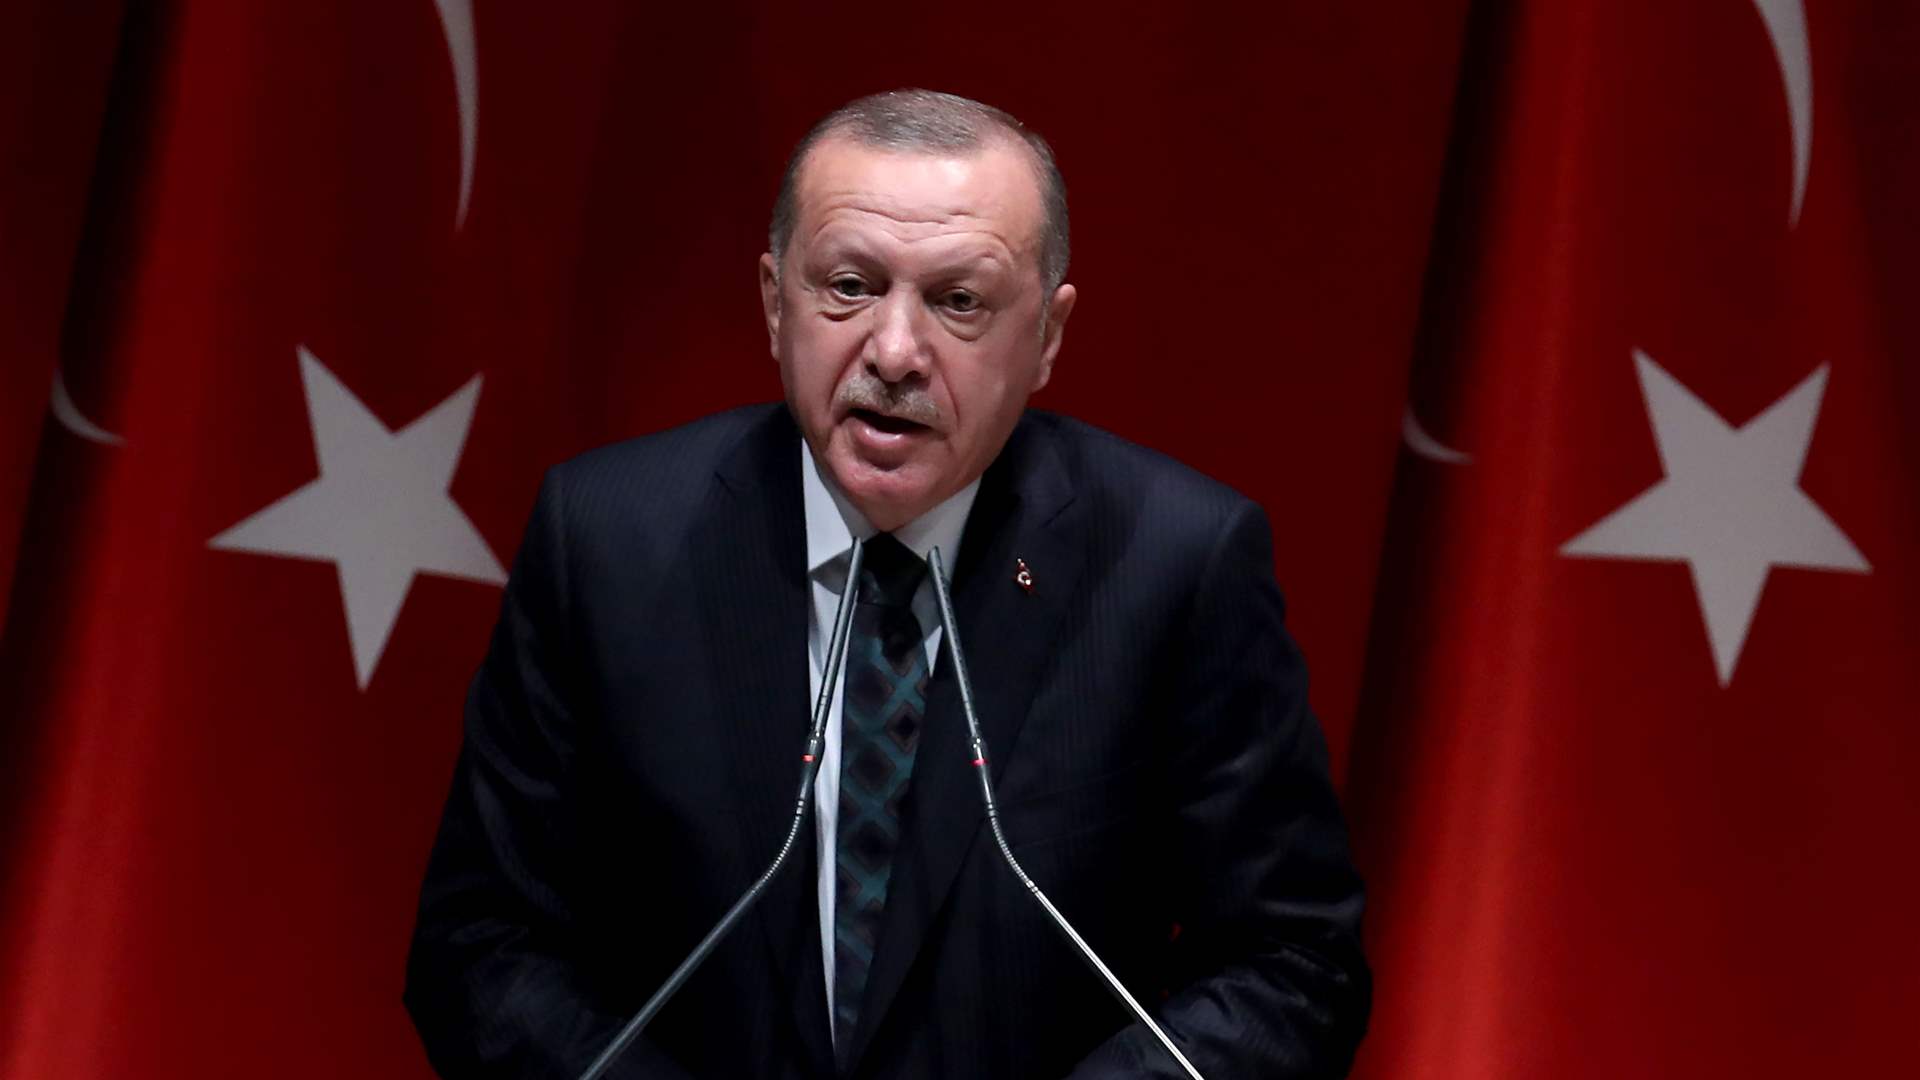 Erdogan urges Israel and Palestinians to act &quot;rationally&quot;